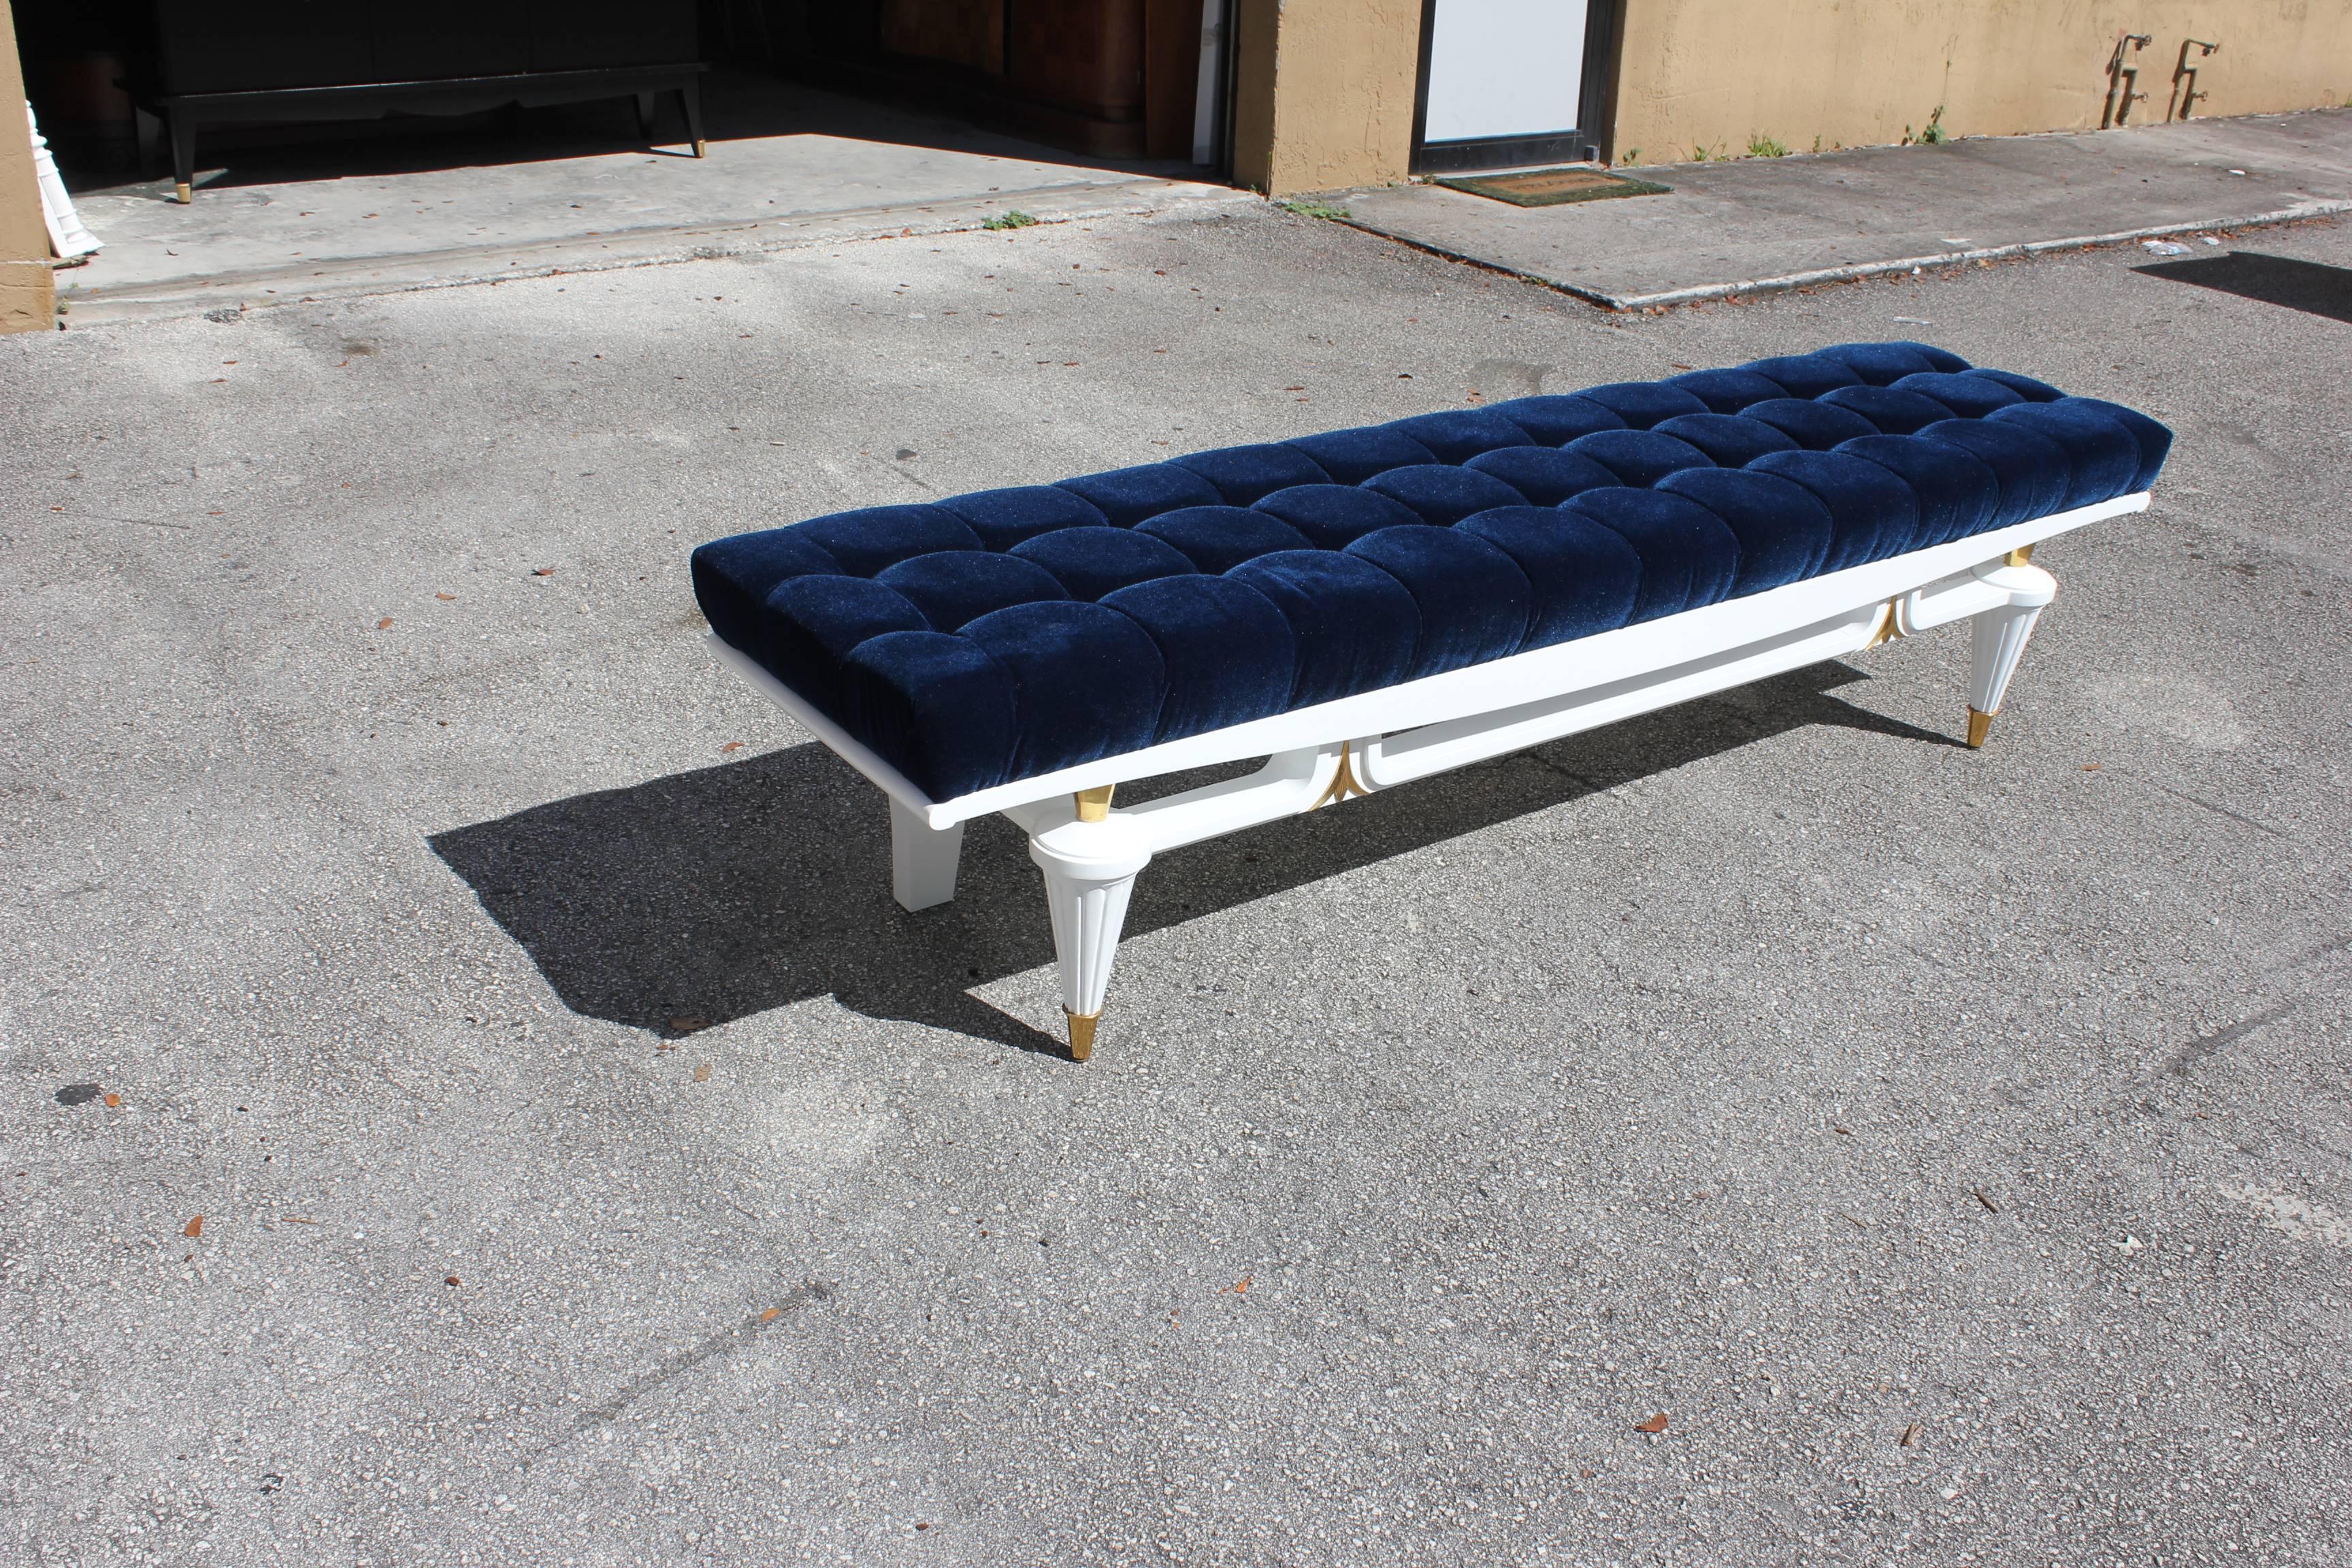 Monumental French Art Deco snow white lacquered mahogany sitting bench with beautiful hardware, circa 1940s. Newly upholstered in a very high textile velvet royal blue. Newly refinished. White lacquer legs with brass caps. We bought this beautiful